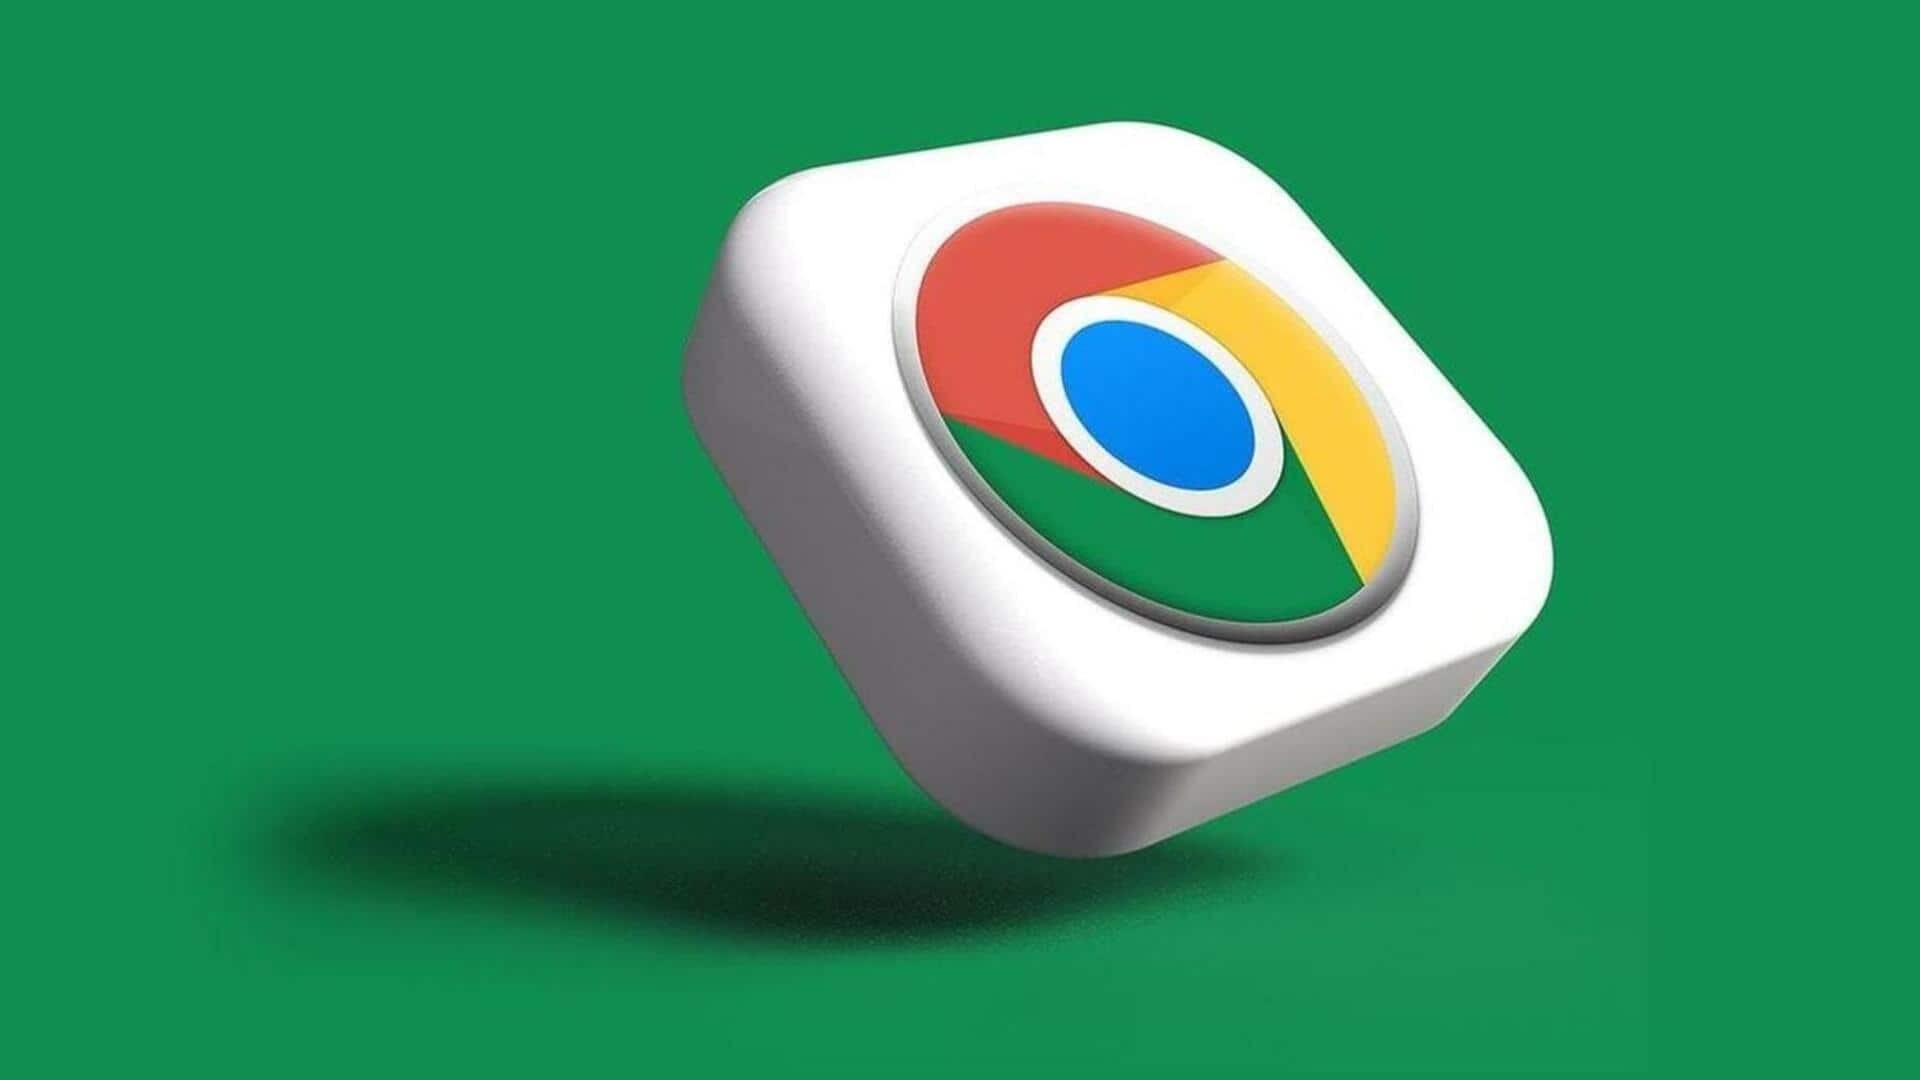 Critical security patches issued for Chrome, Edge, Firefox: Update now